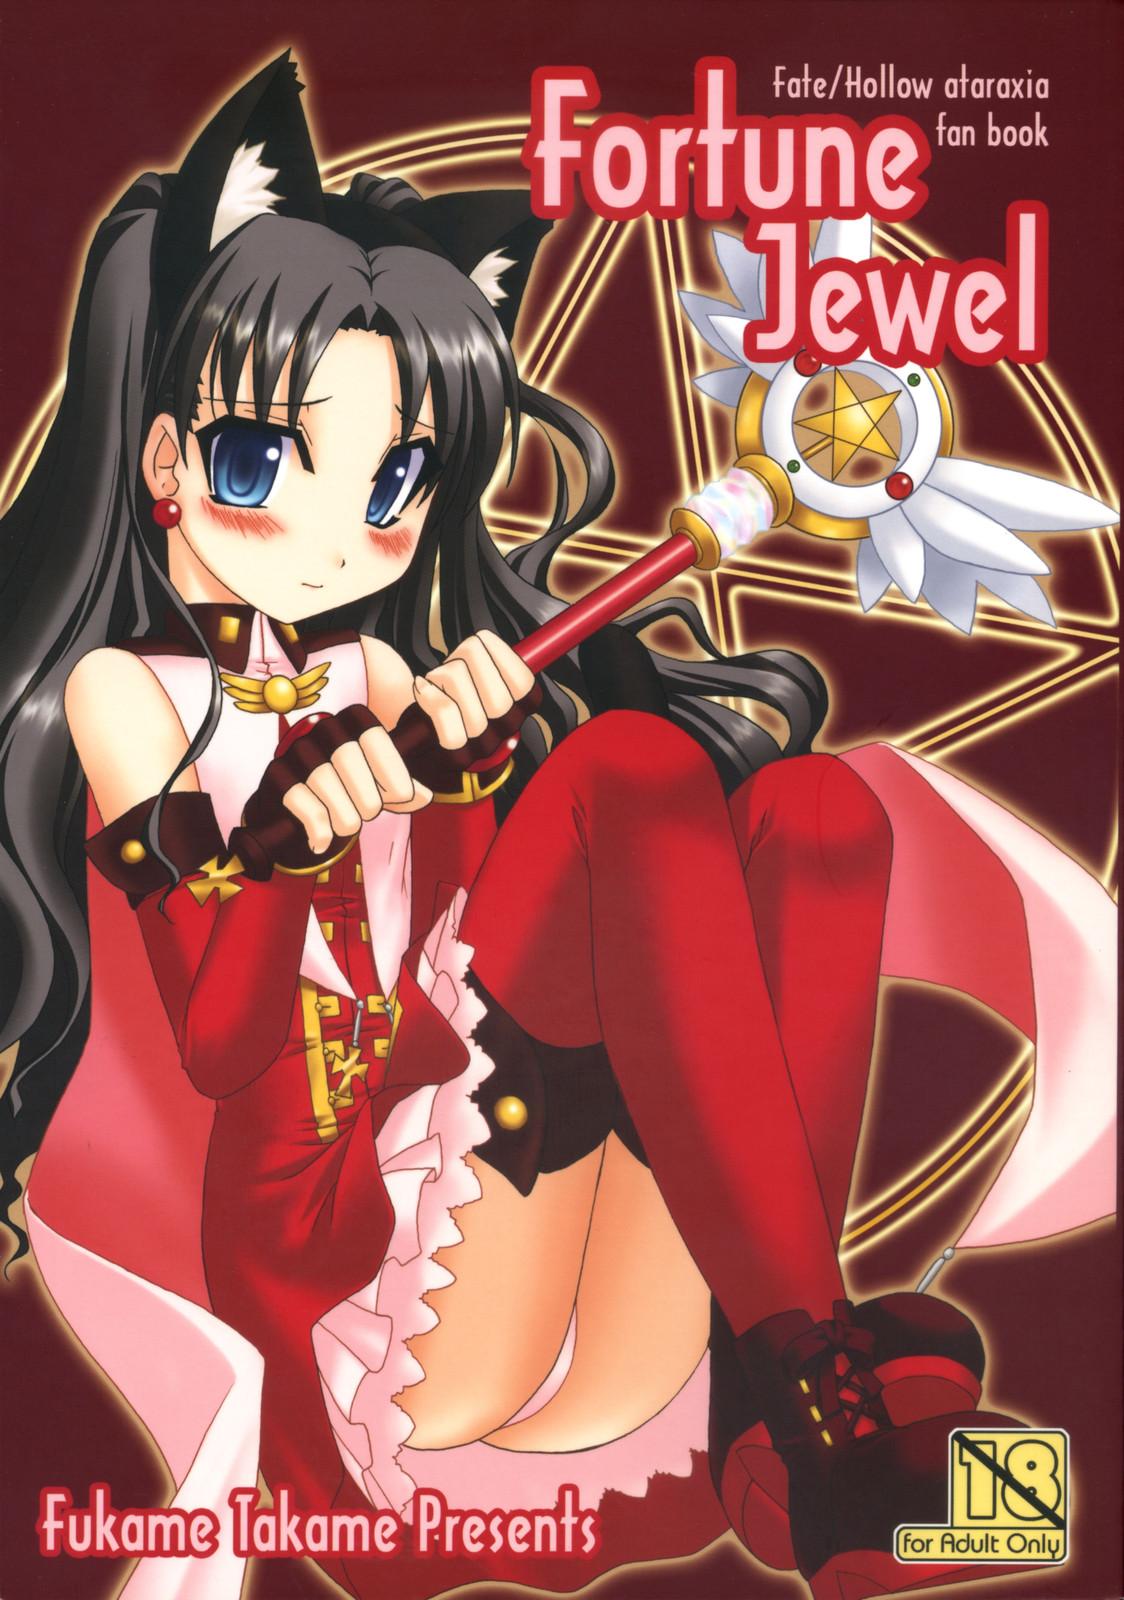 Hot Women Fucking Fortune Jewel - Fate stay night Fate hollow ataraxia Cavala - Picture 1